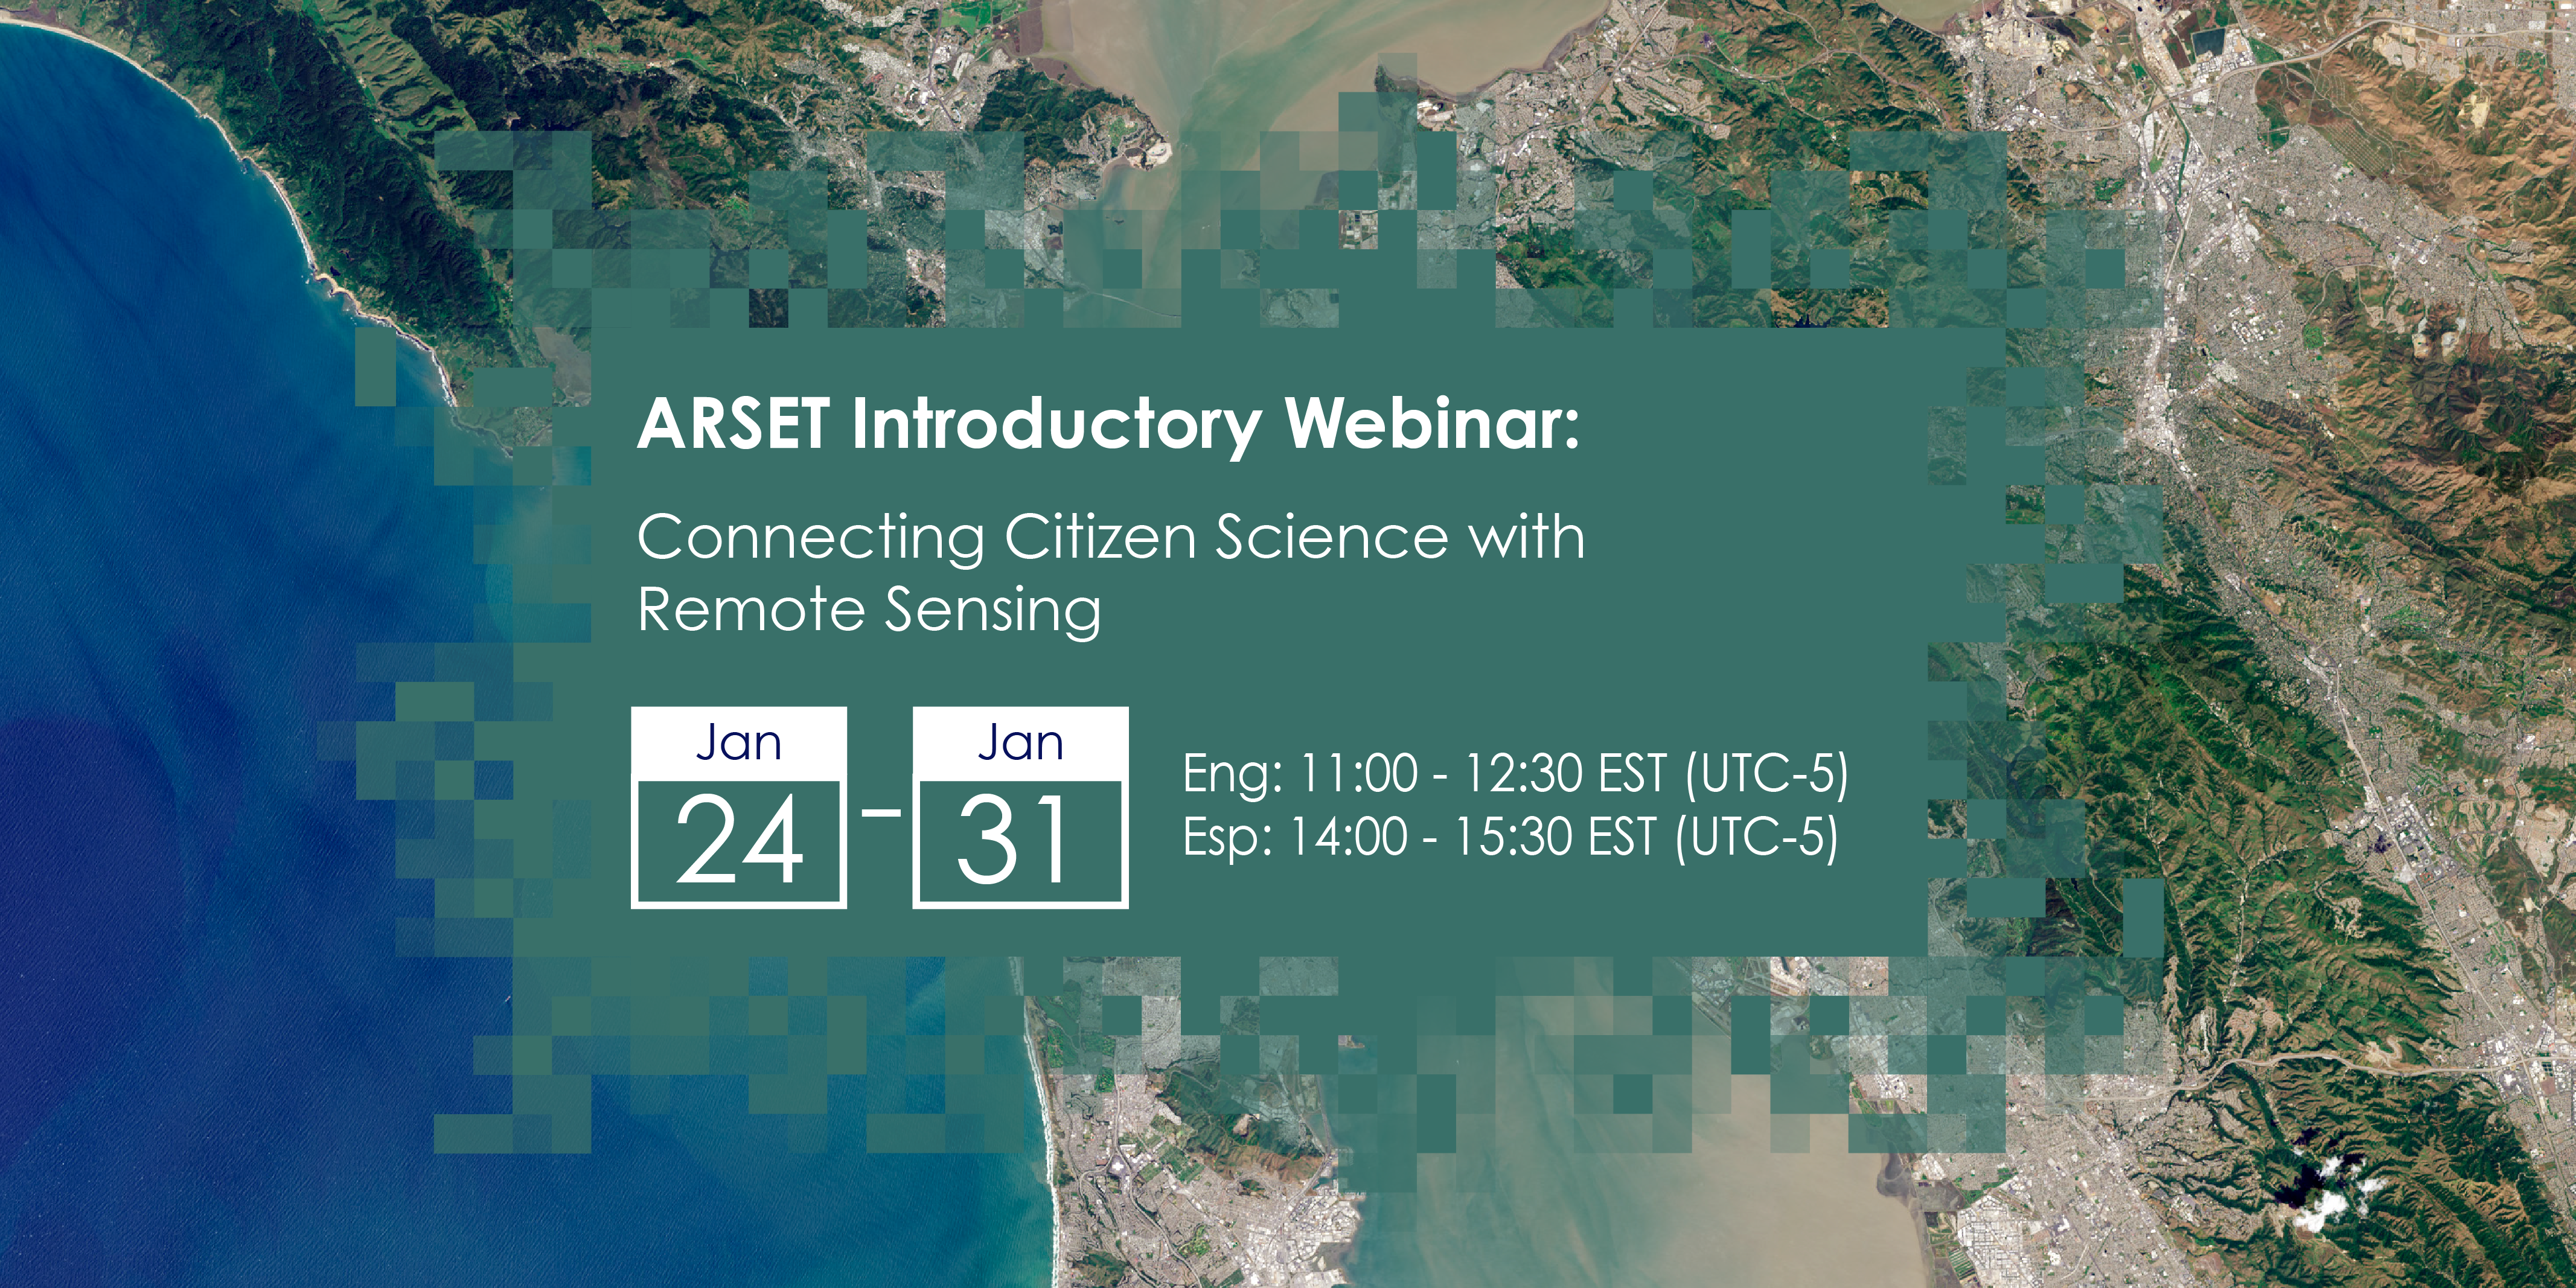 ARSET Introductory Webinar shareable